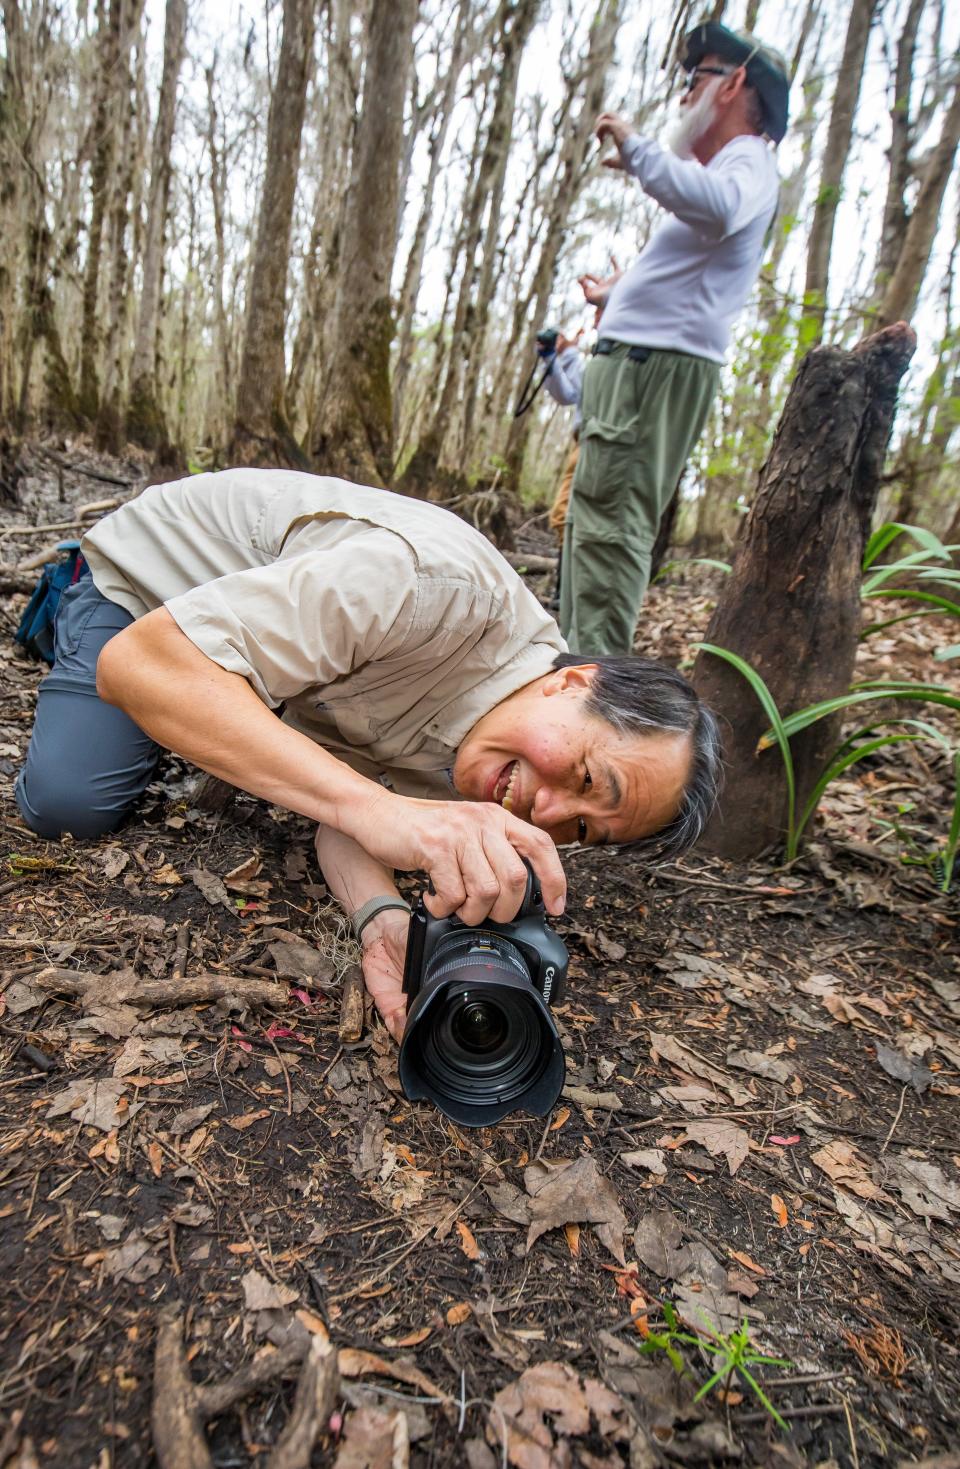 Doug Eng takes pictures of a sprouting cypress tree while working on a project on the Ocklawaha River in 2020.